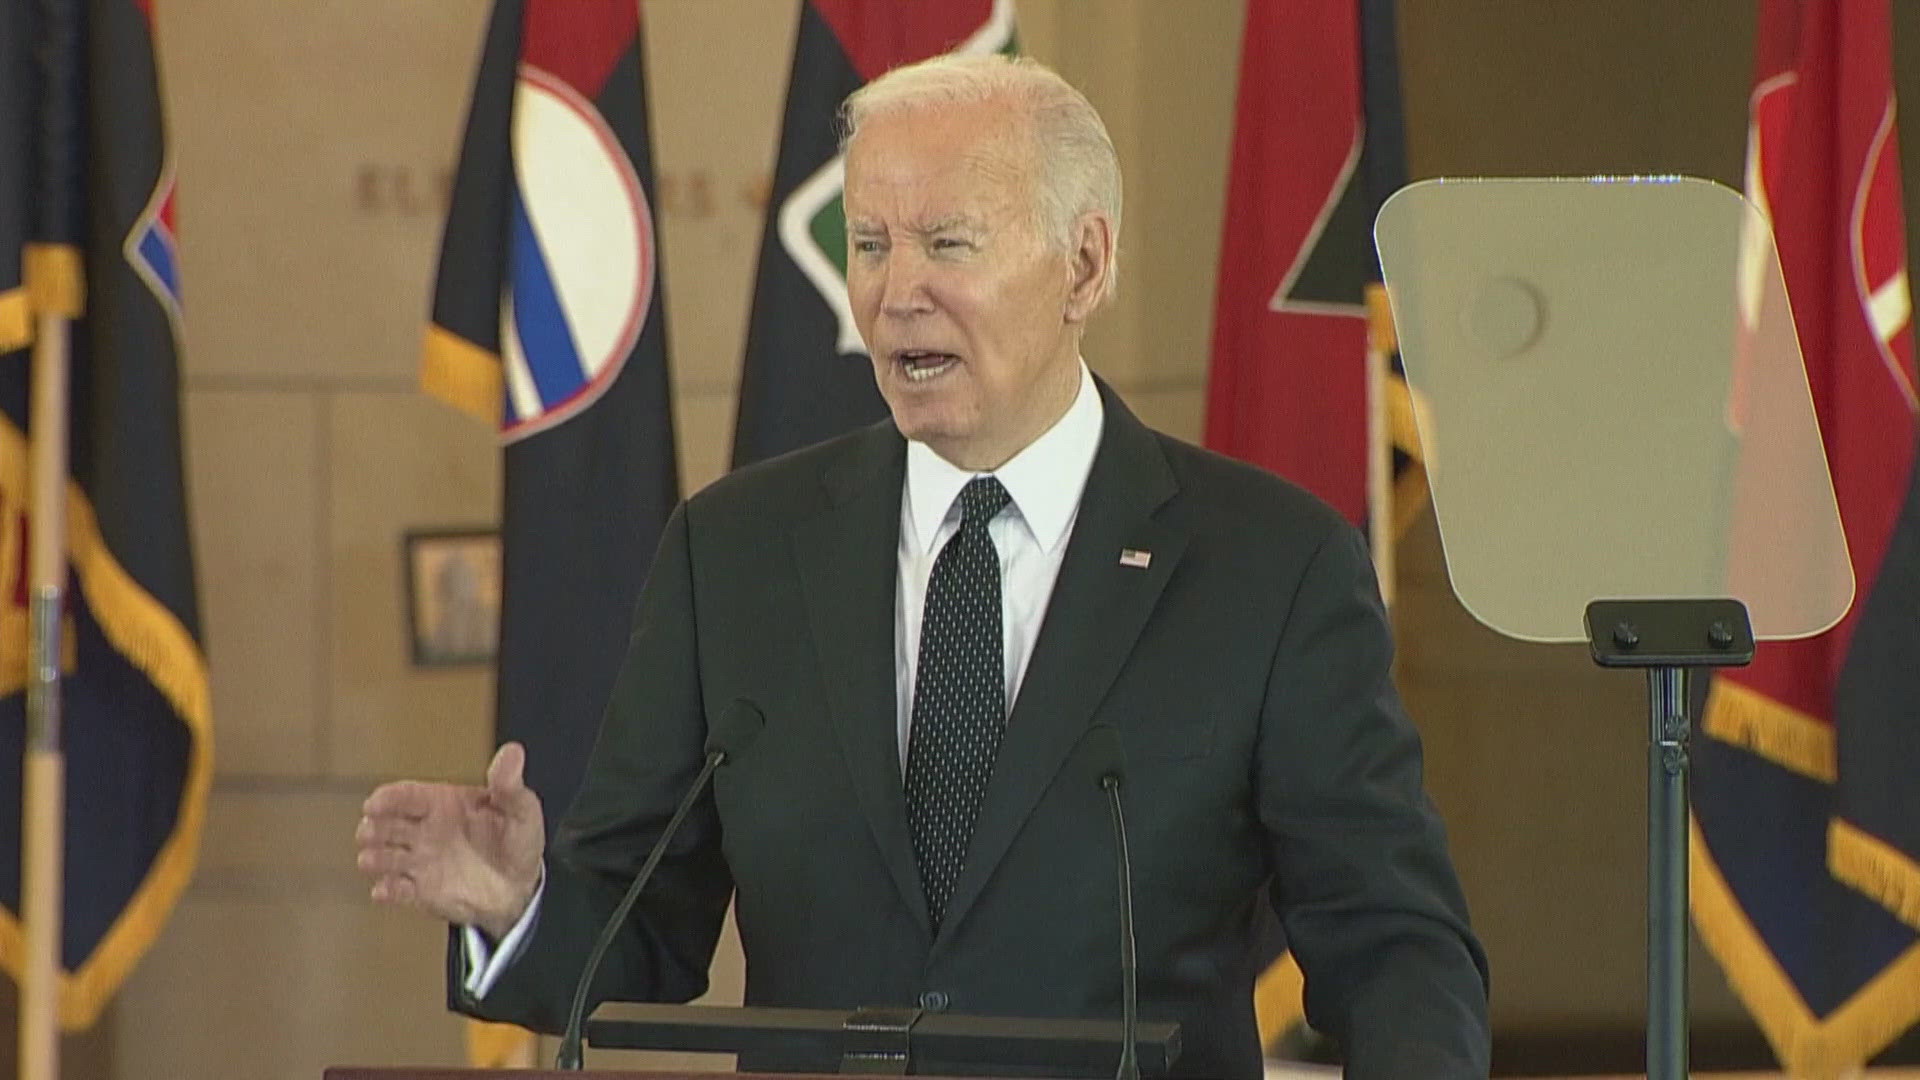 President Joe Biden has condemned the “ferocious surge of antisemitism in America and around the world.”